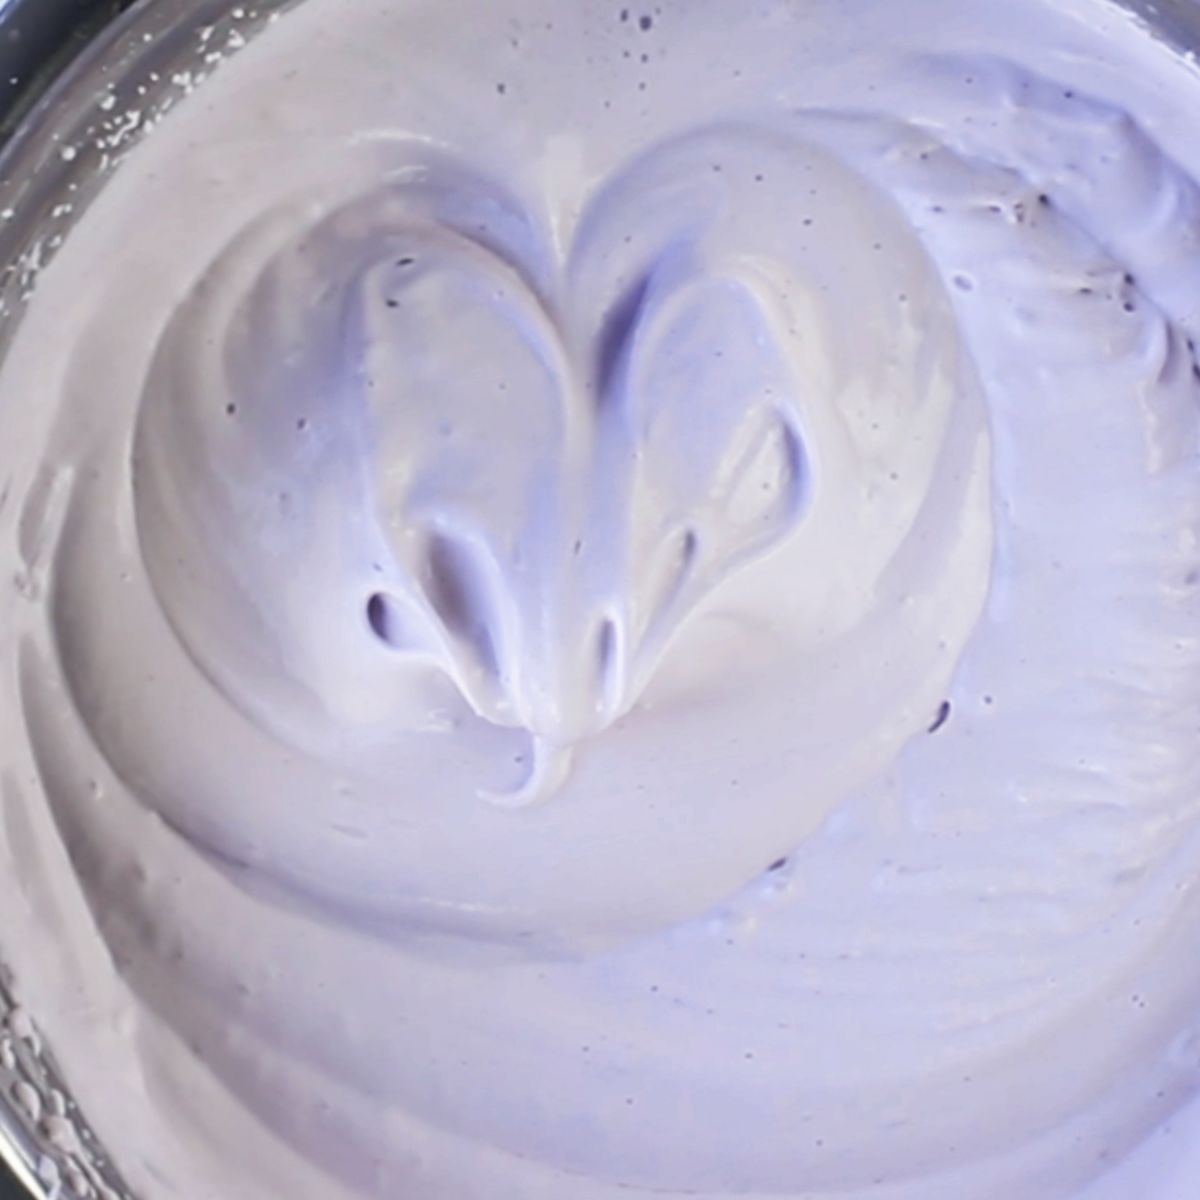 grape syrup combined into whipped cream